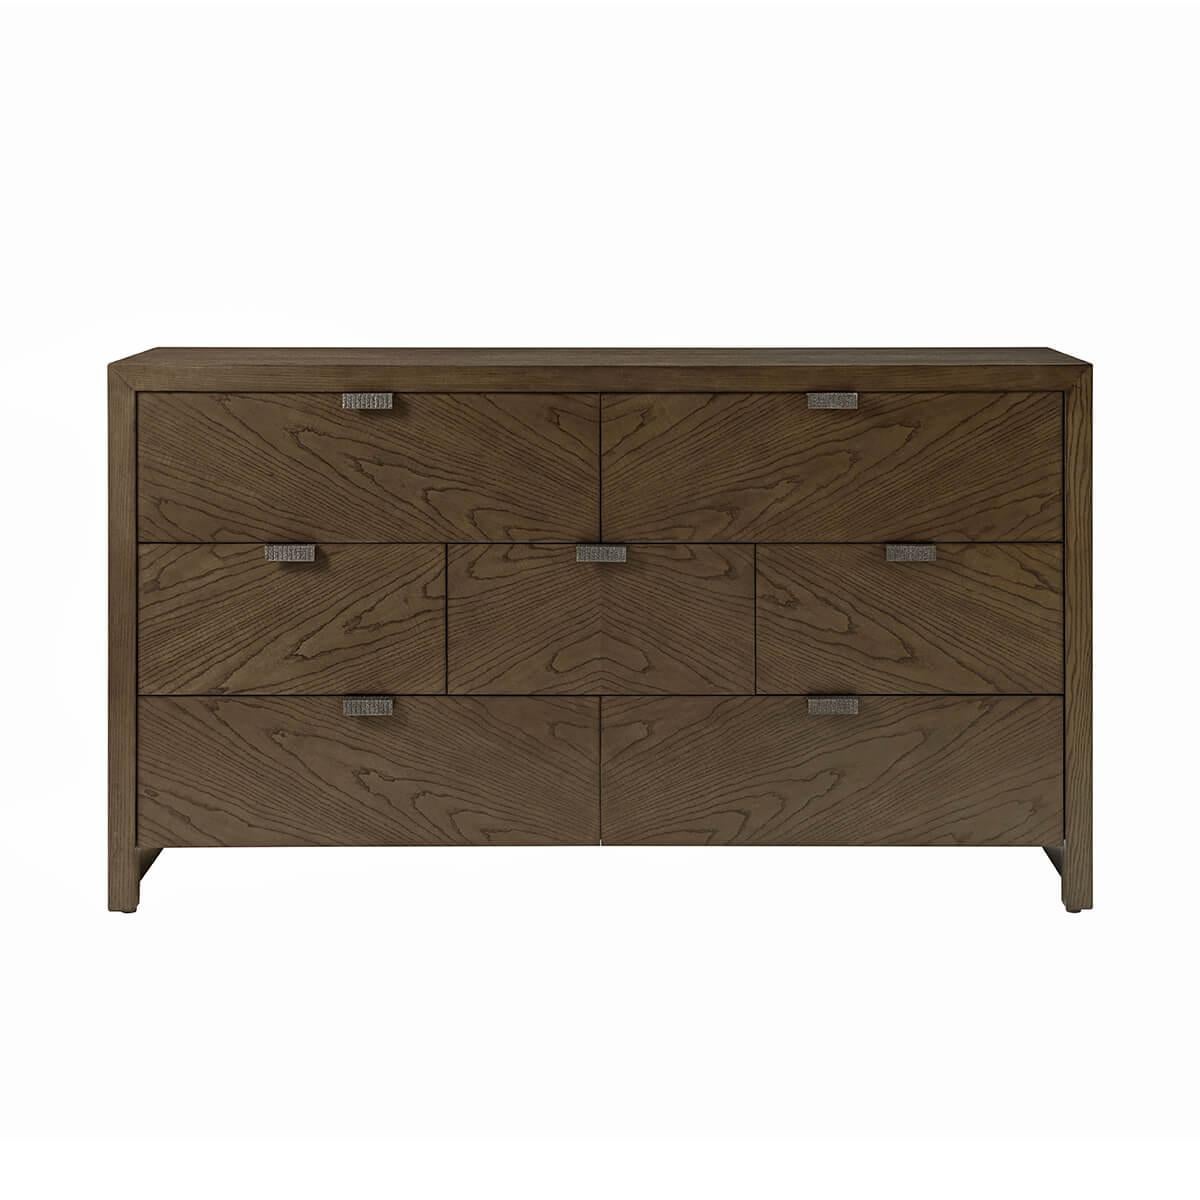 a sleek seven-drawer dresser made of figured cathedral ash in a dark Earth finish with textured metal pulls in our Ember finish and soft close drawers.

Dimensions: 64